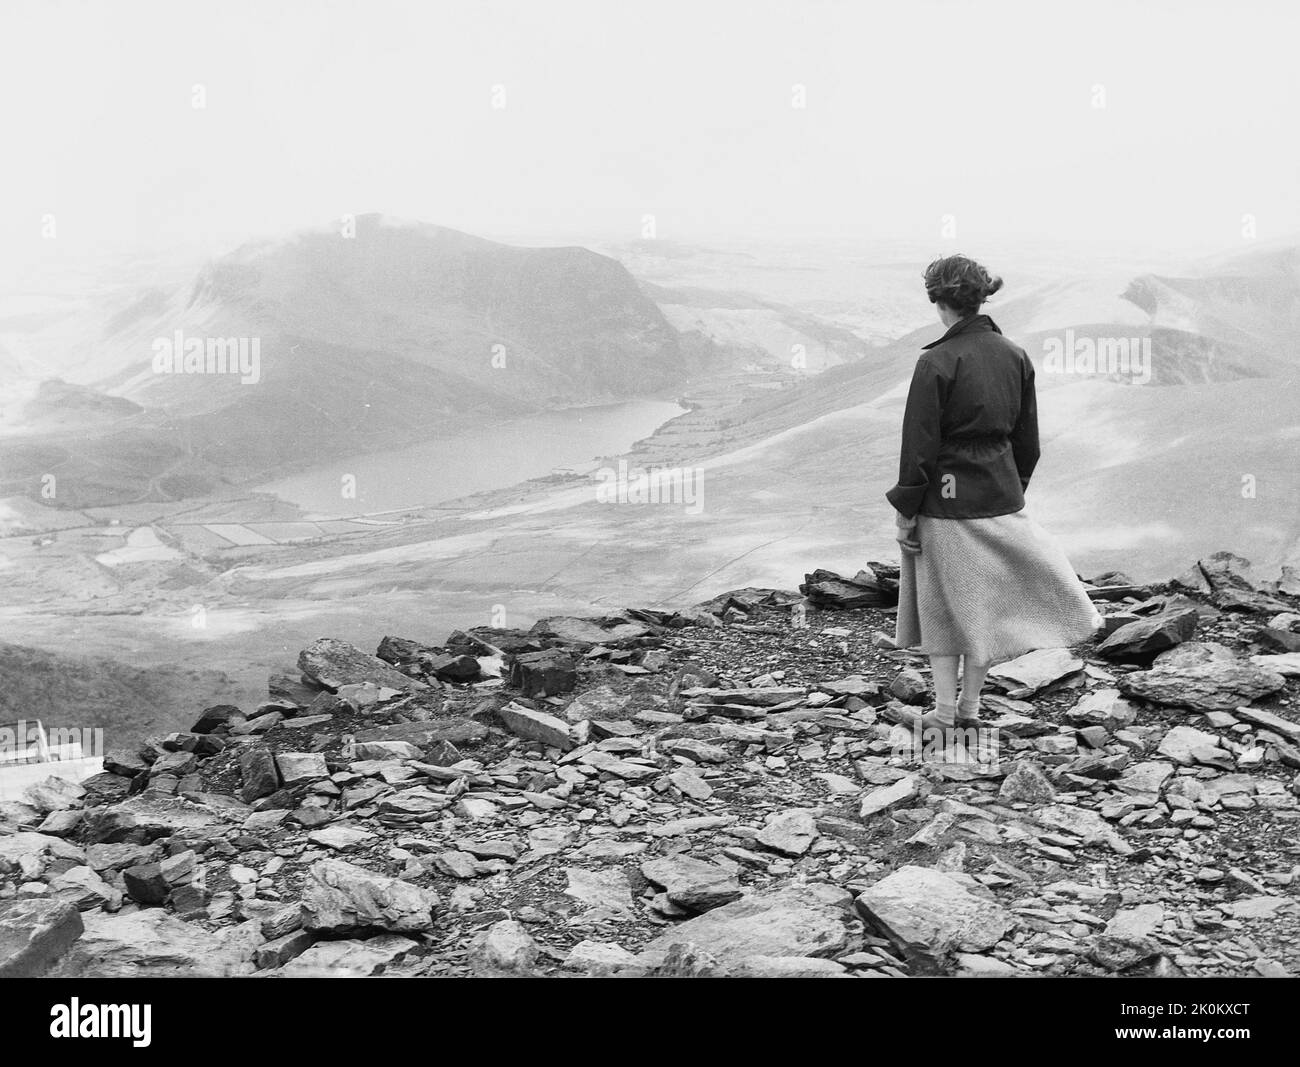 1956, historical, a lady, wearing a jacket and woolen skirt, standing on rocks and slates on a high level ridge in the Snowdonia mountains, Wales, UK, looking over the valley and landscape below. Stock Photo